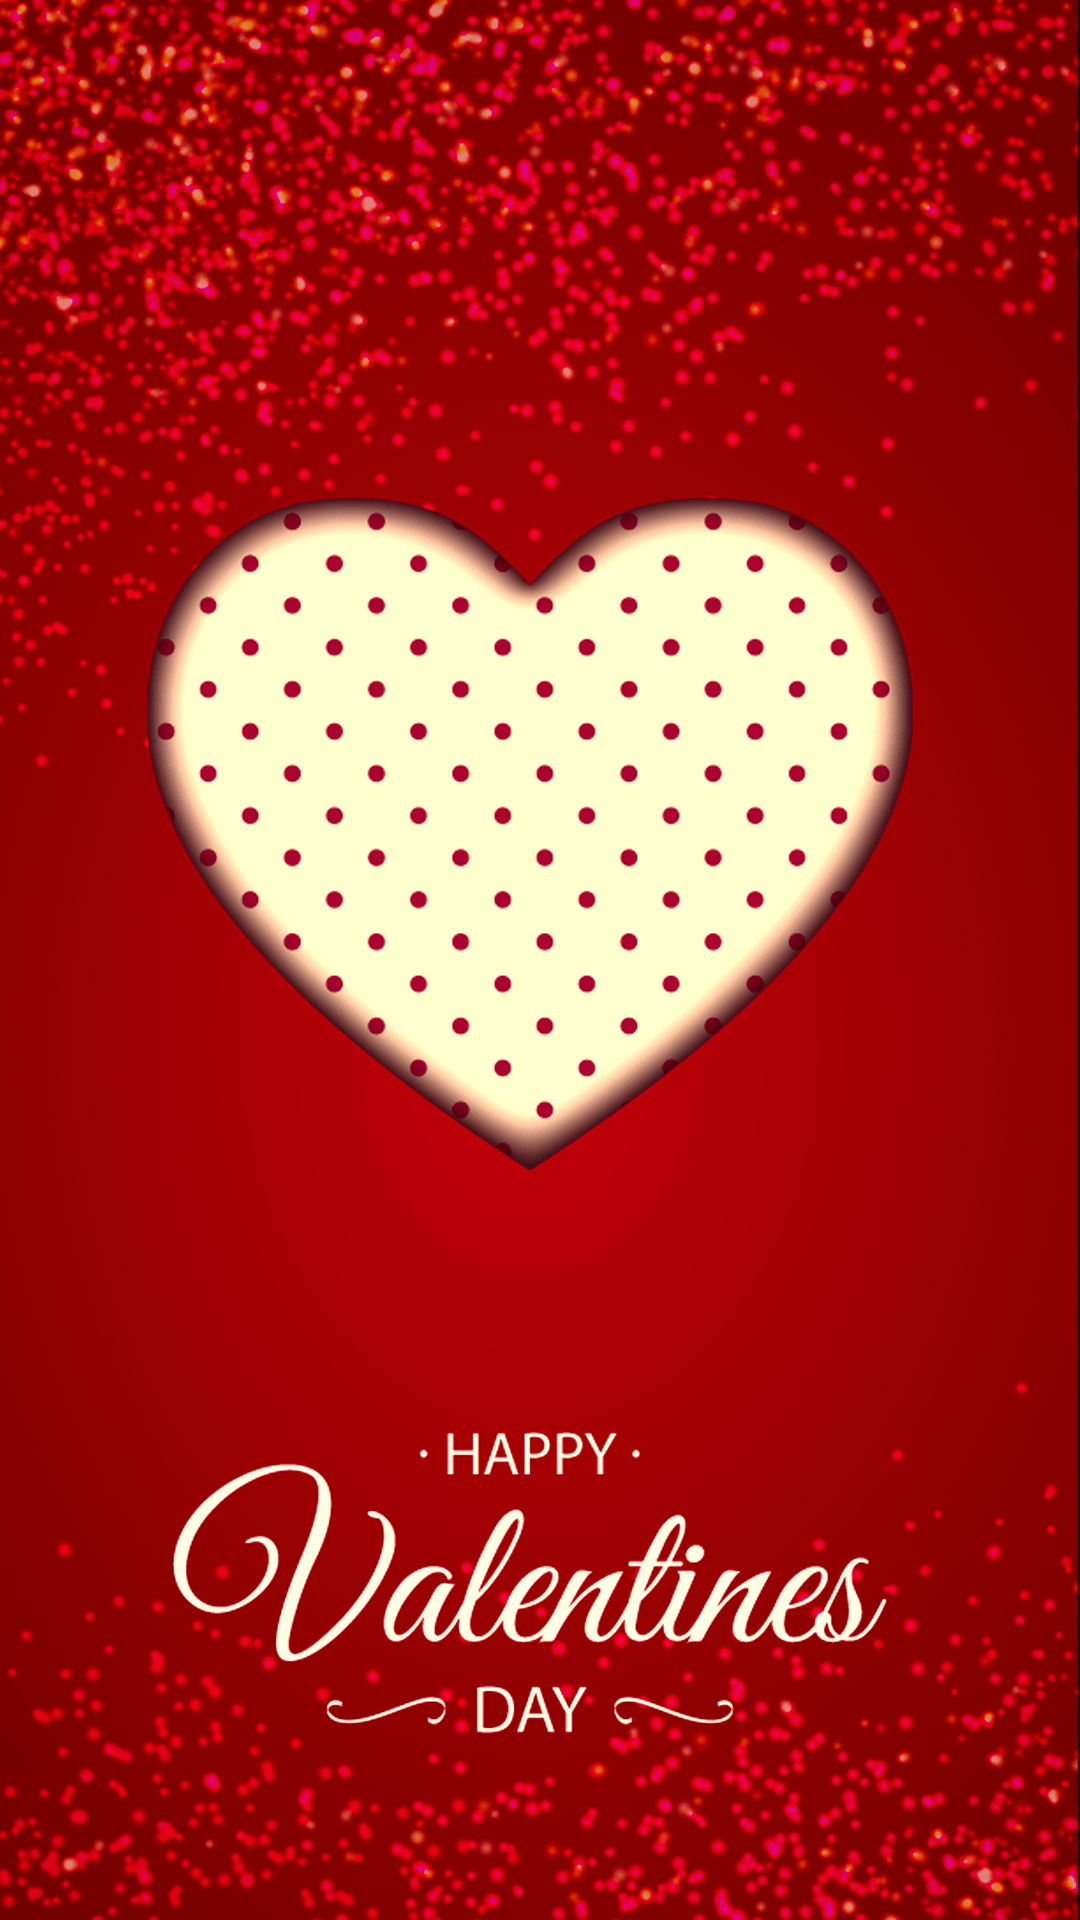 Valentine Hd Wallpapers For Mobile